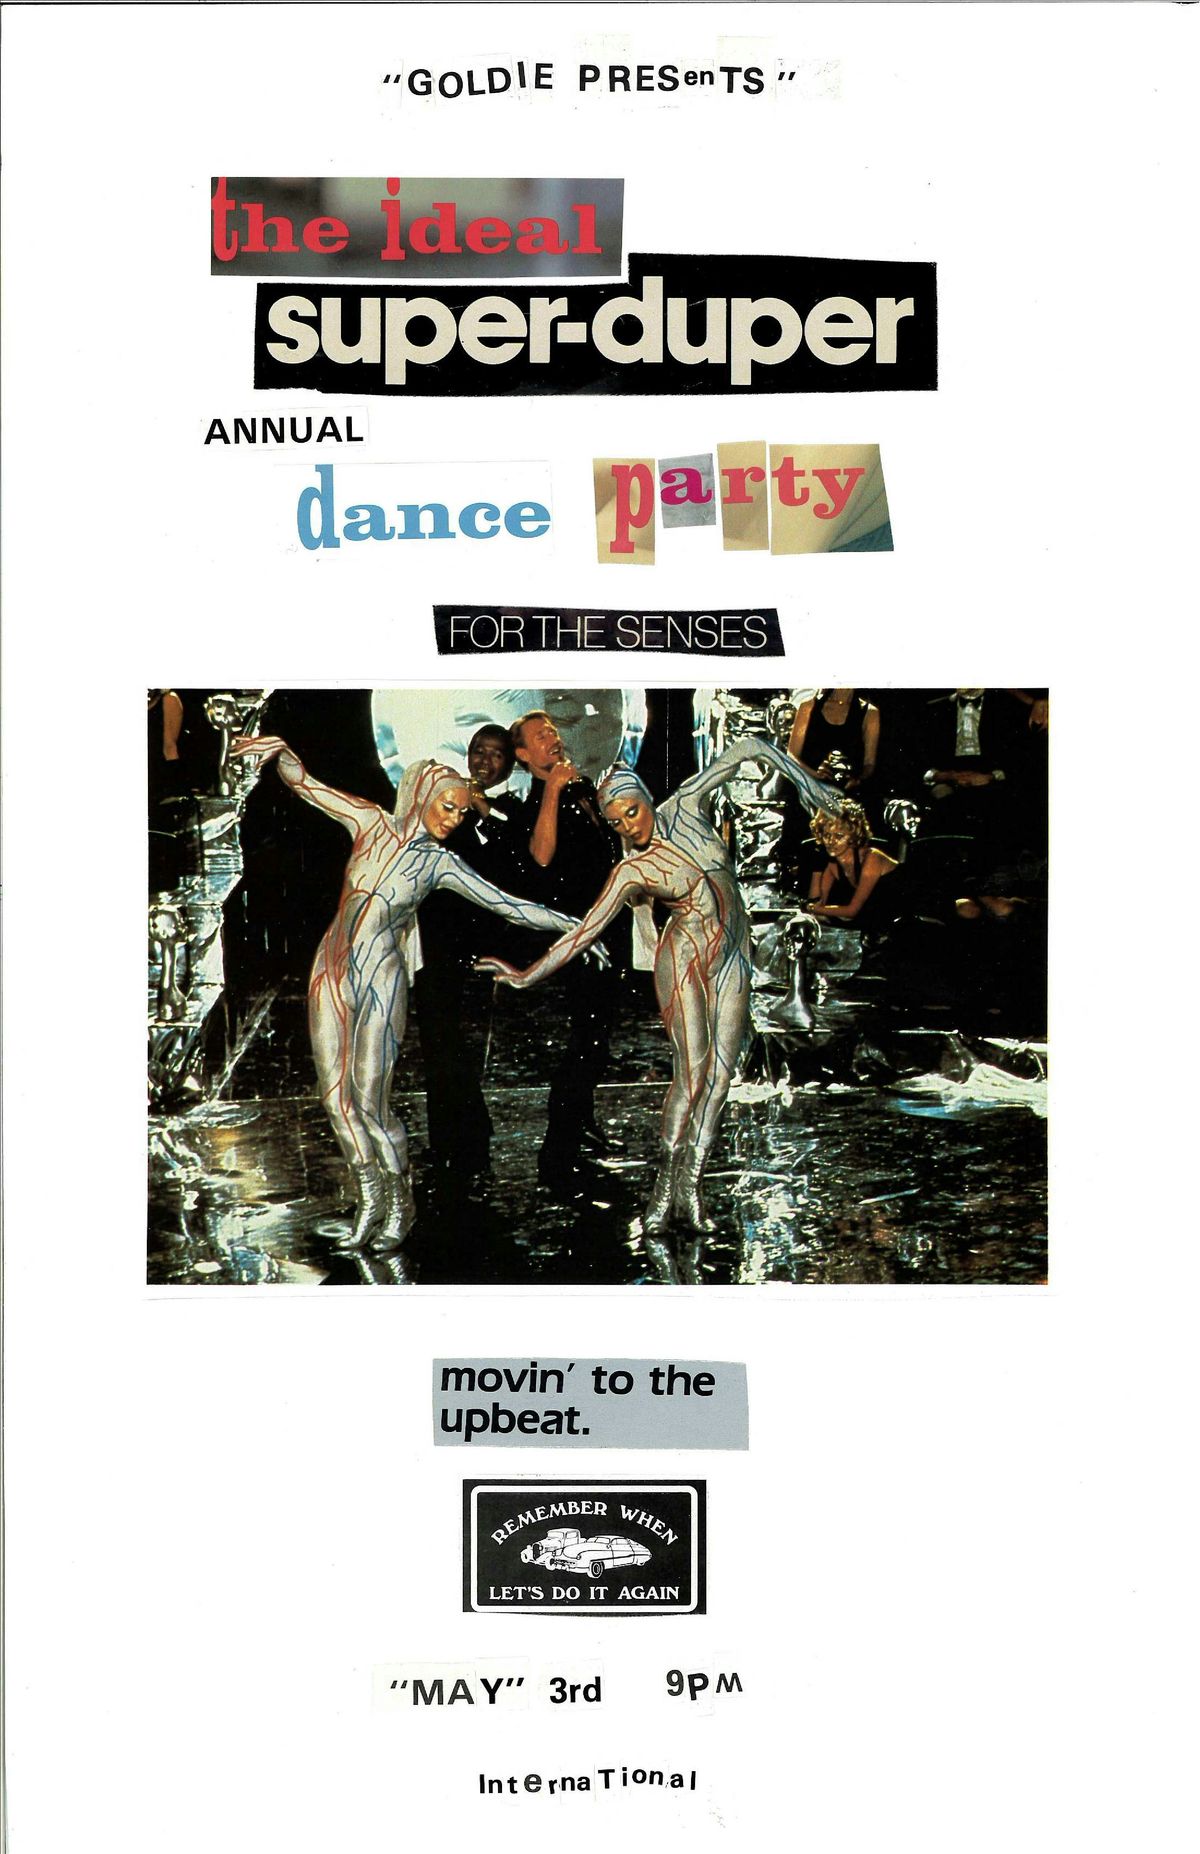 Goldie Presents: The Ideal Super-duper Annual Dance Party